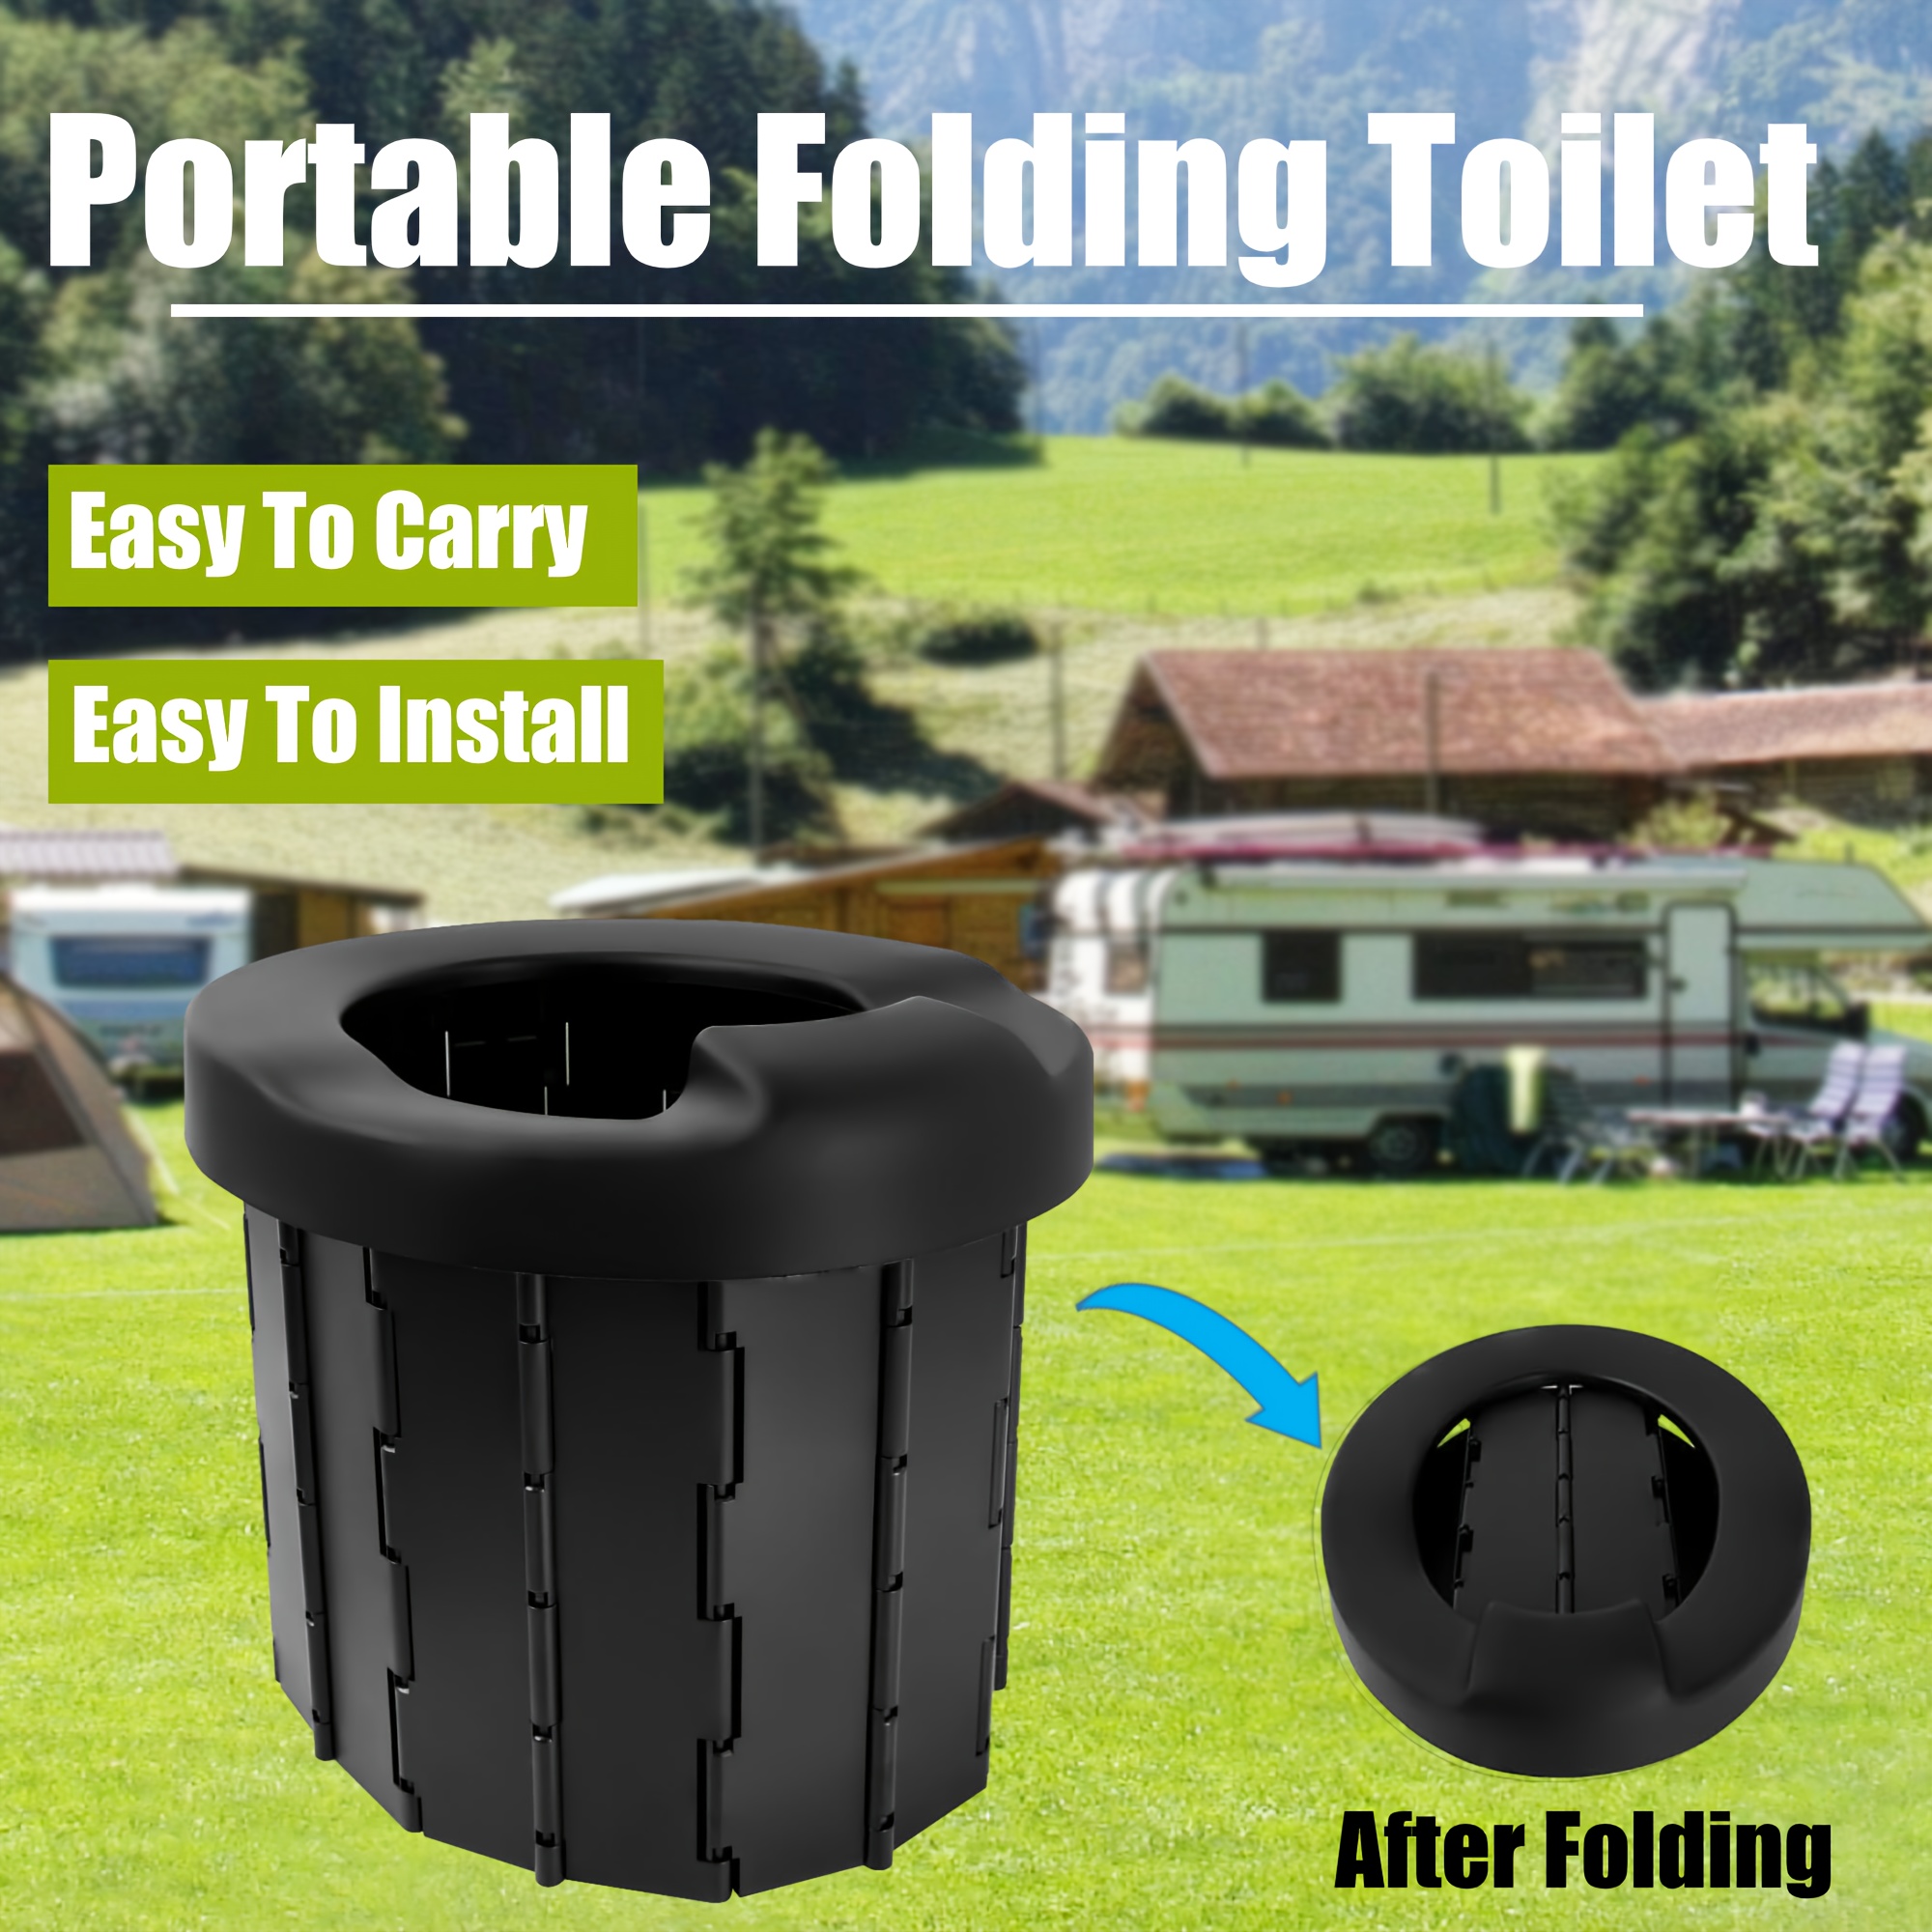 

Portable Folding Toilet For Camping, Waterproof Porta Potty Car Toilet With Lid, Travel Portable Toilet For Hiking Travel Camping Beach Trips